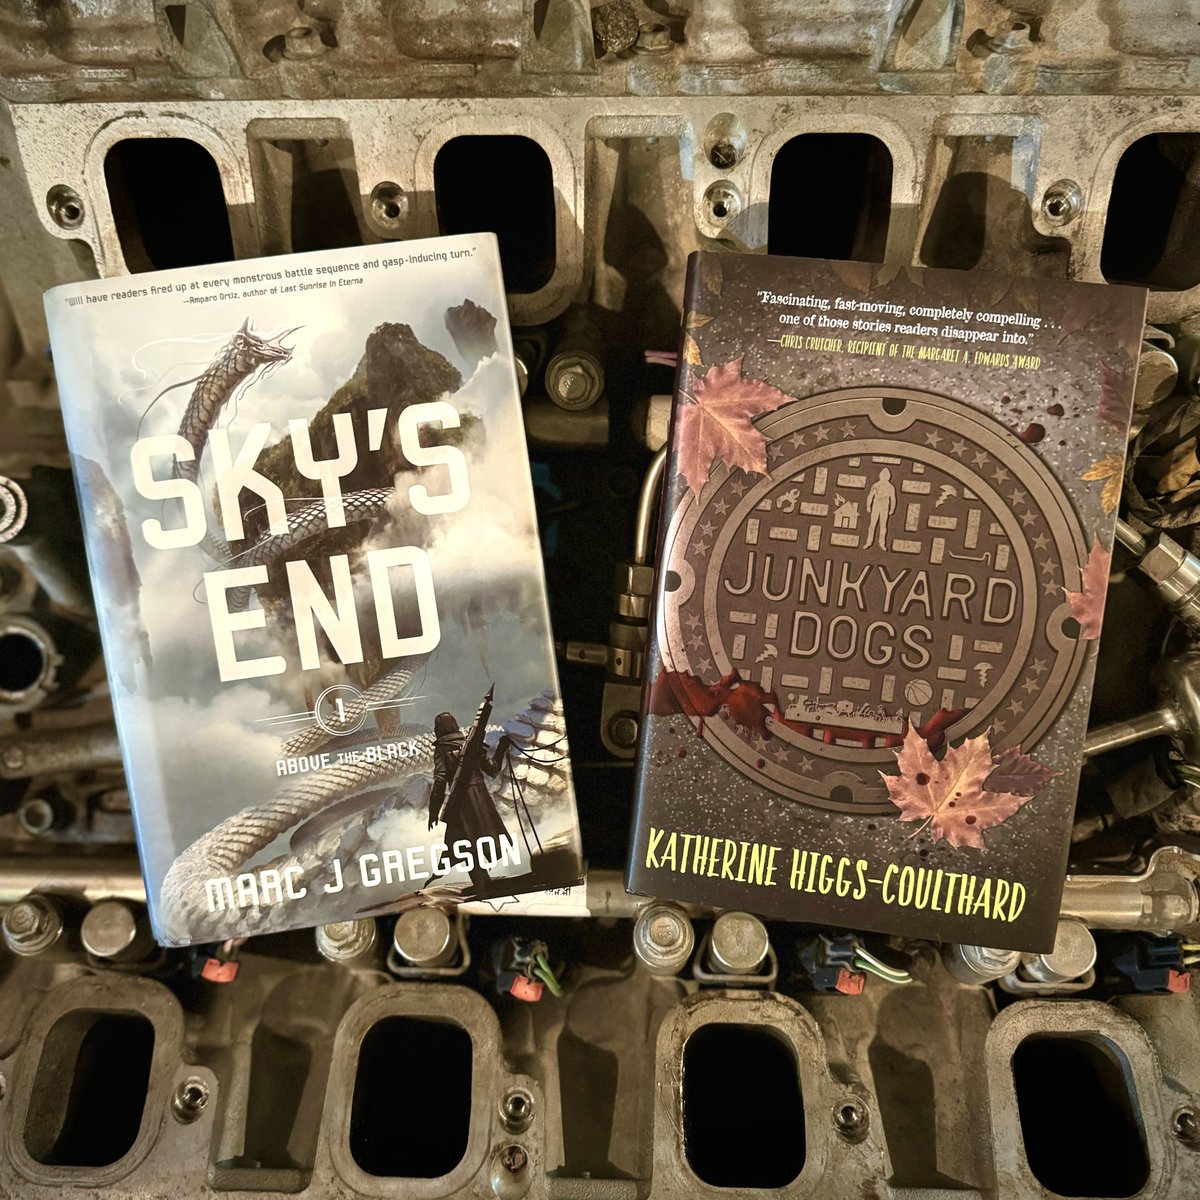 Are you looking for a gripping story to add to your summer reading list? How about a kill-or-be-killed competition with a scrappy underdog hell-bent on revenge? Or, a gut-wrenching story of an unhoused teenager struggling to survive a criminal scrapping ring? On shelves now!